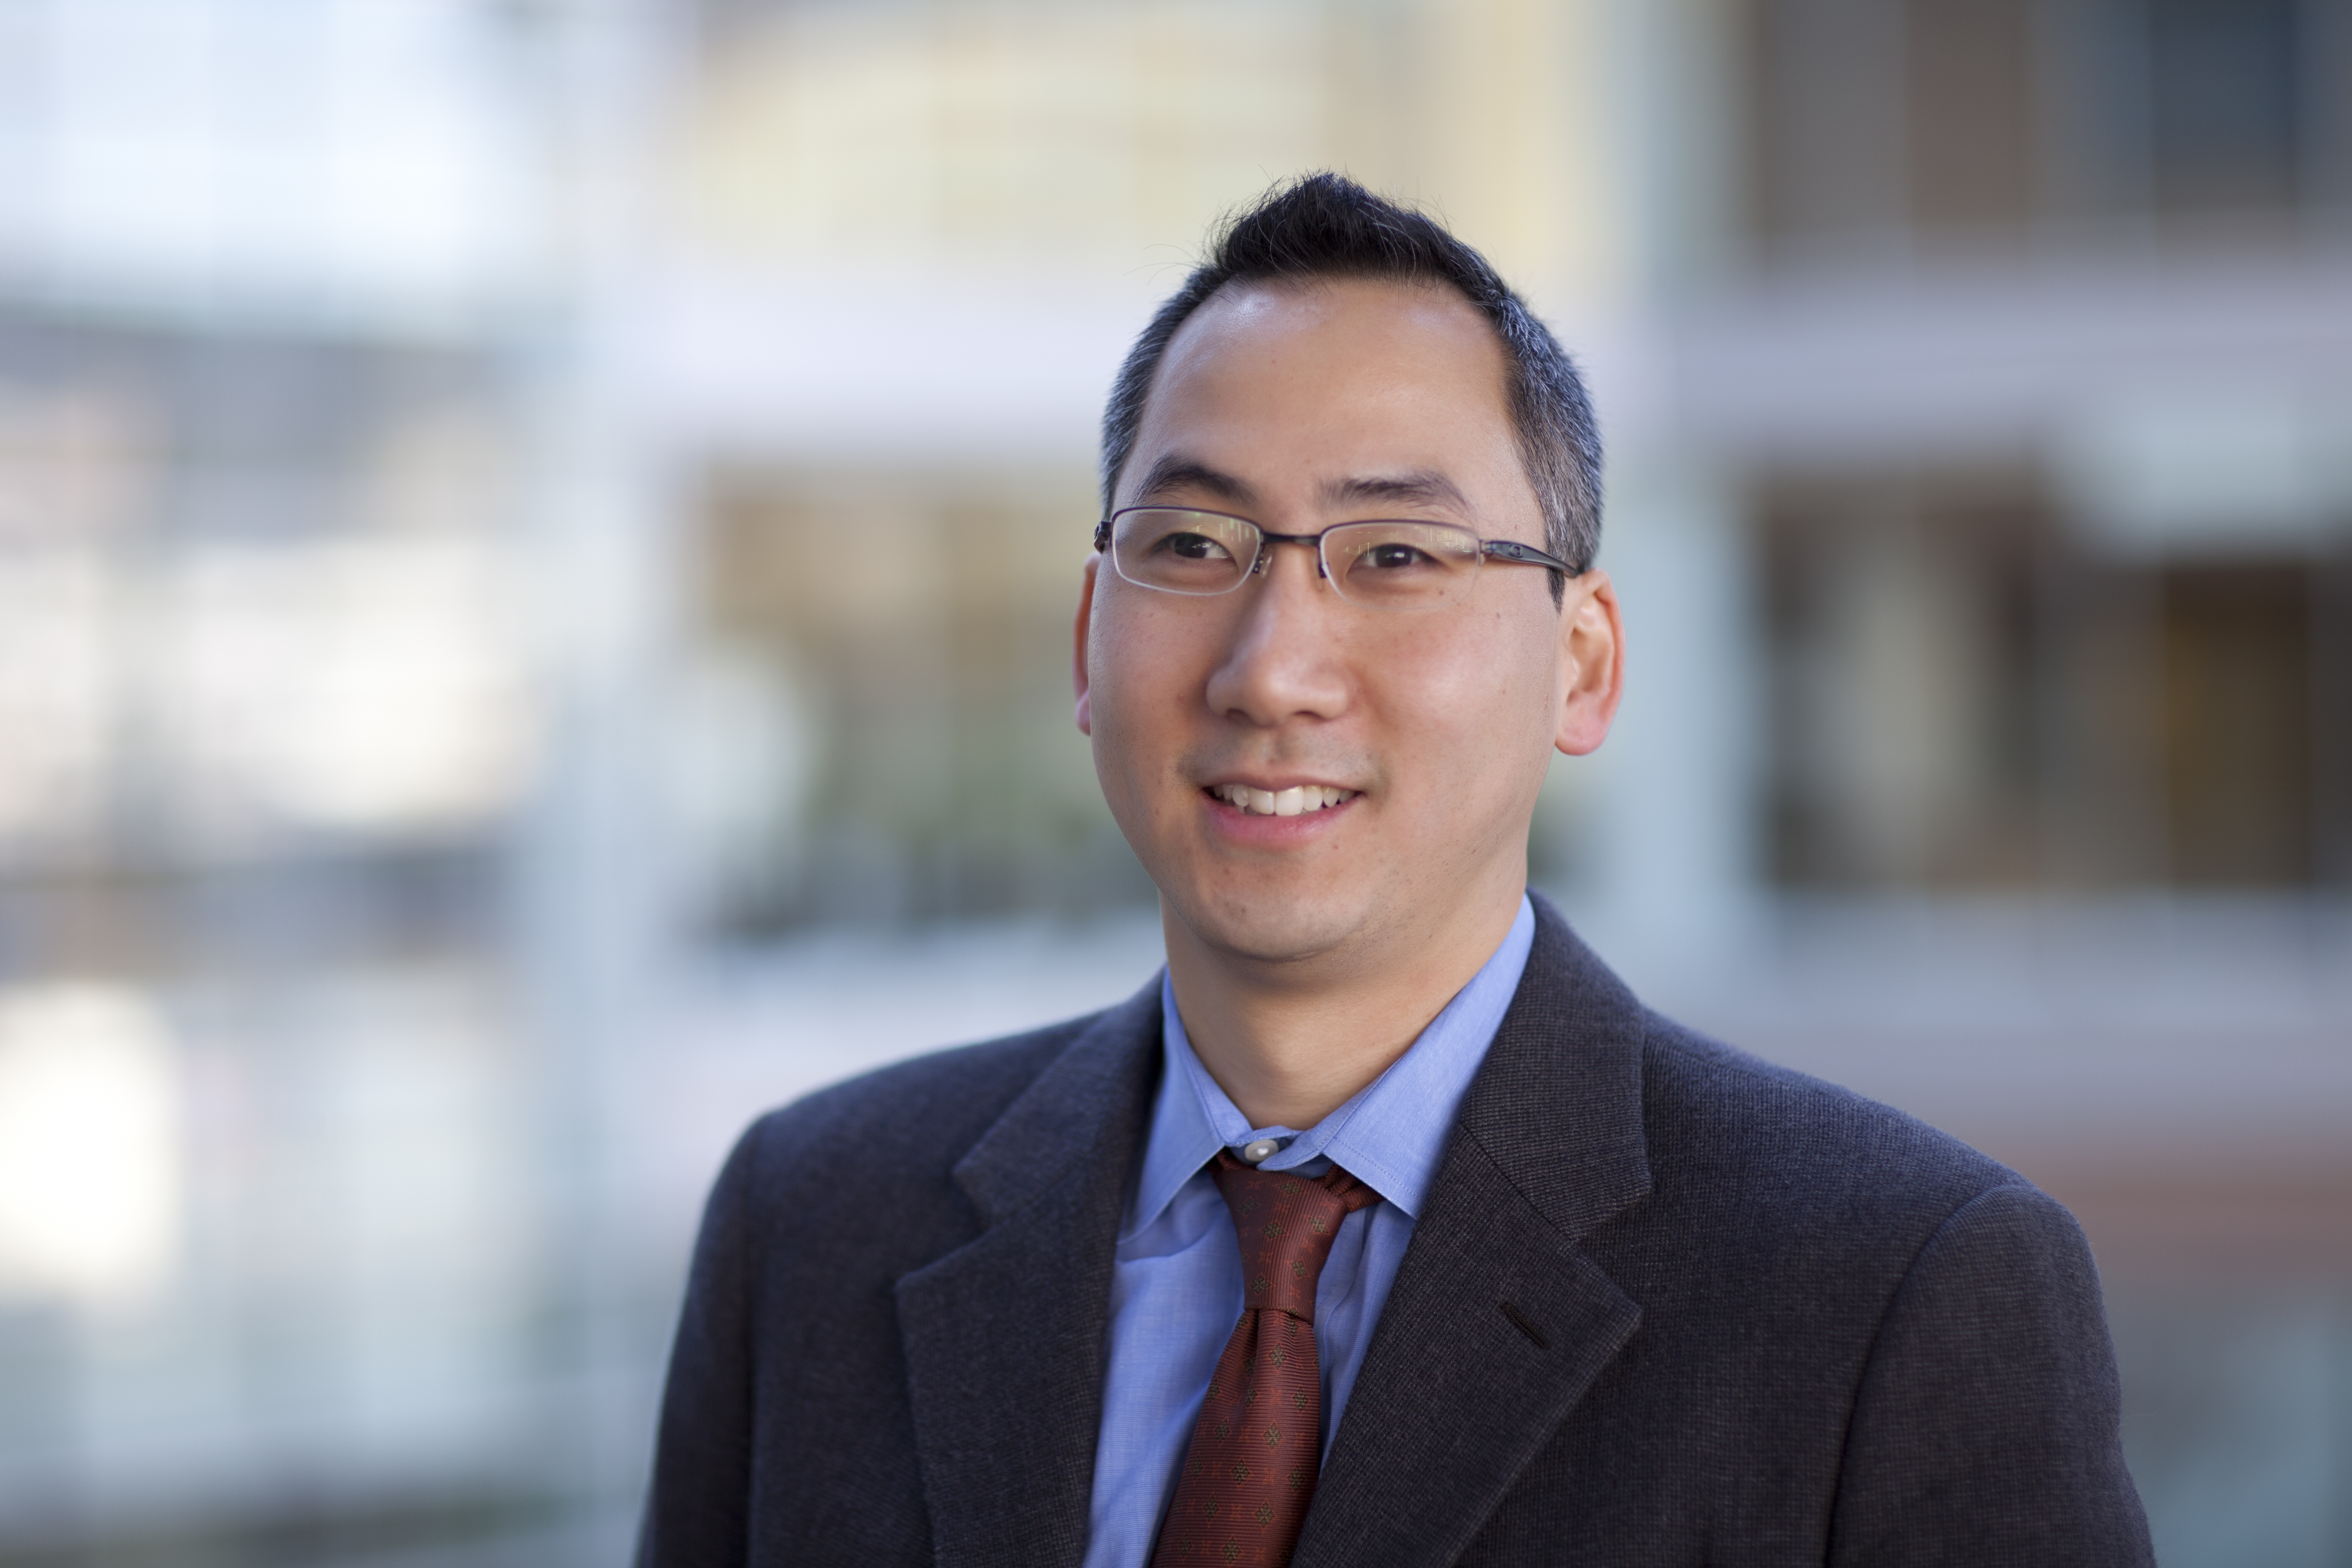 UNC Lineberger's William Kim, MD, and colleagues report that cognitive computing can scour large volumes of scientific data to identify potentially relevant cancer clinical trials or therapeutic options.